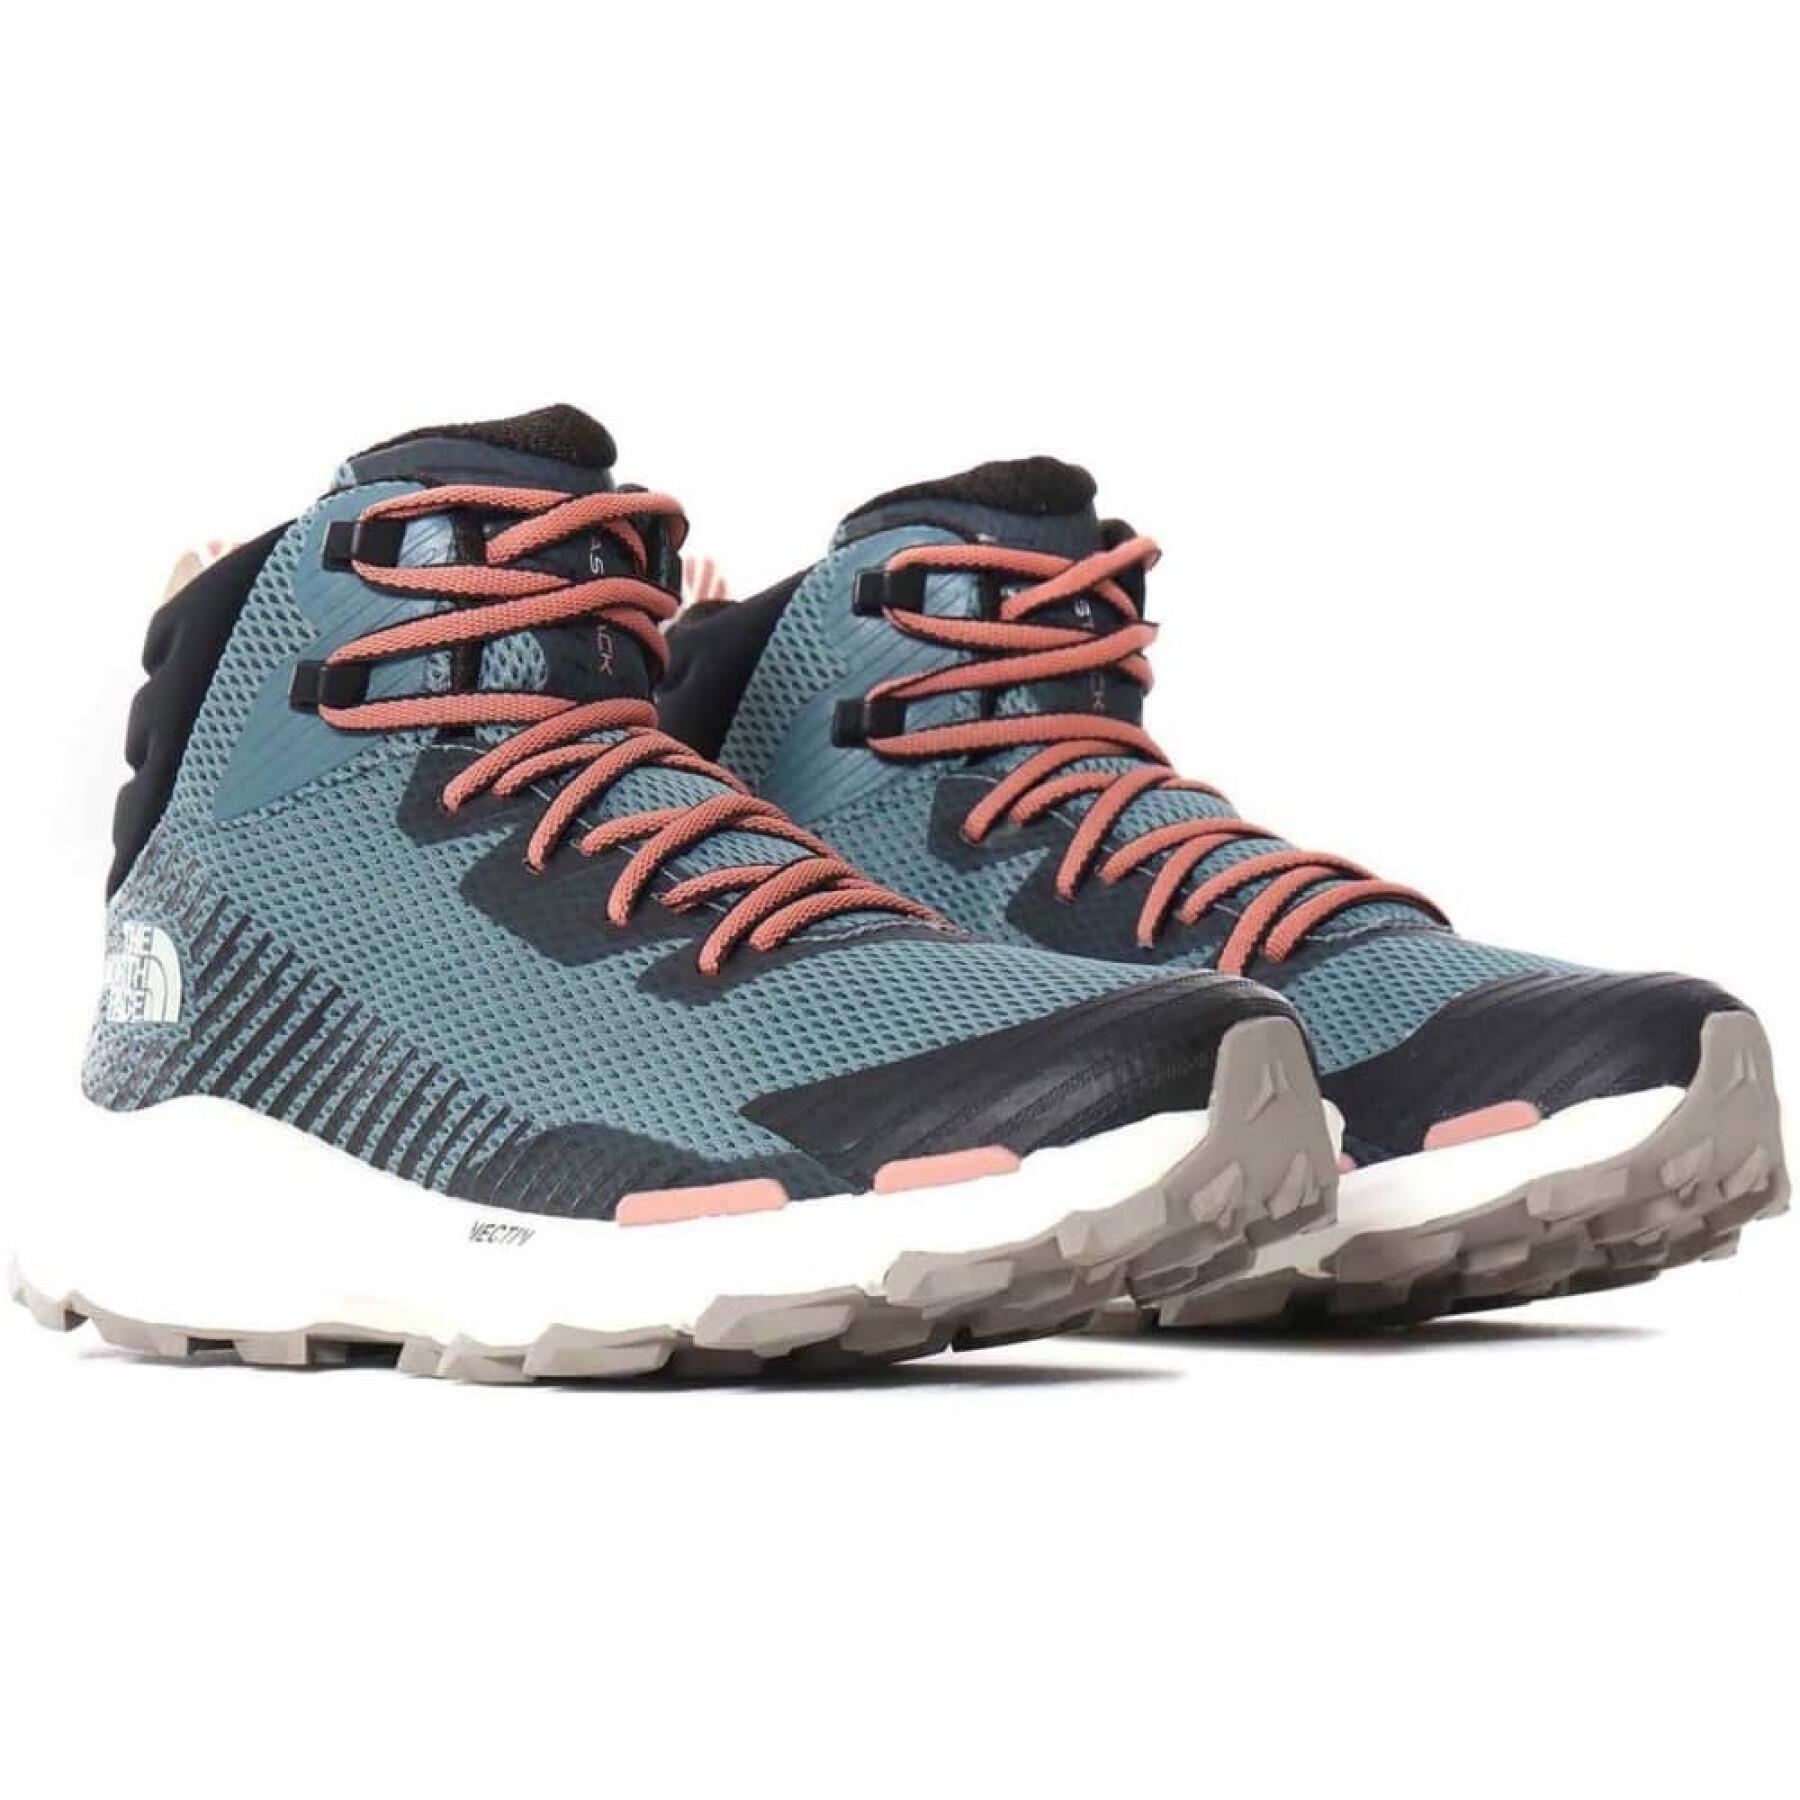 Women's hiking shoes The North Face Vectiv fastpack mid futureLight™